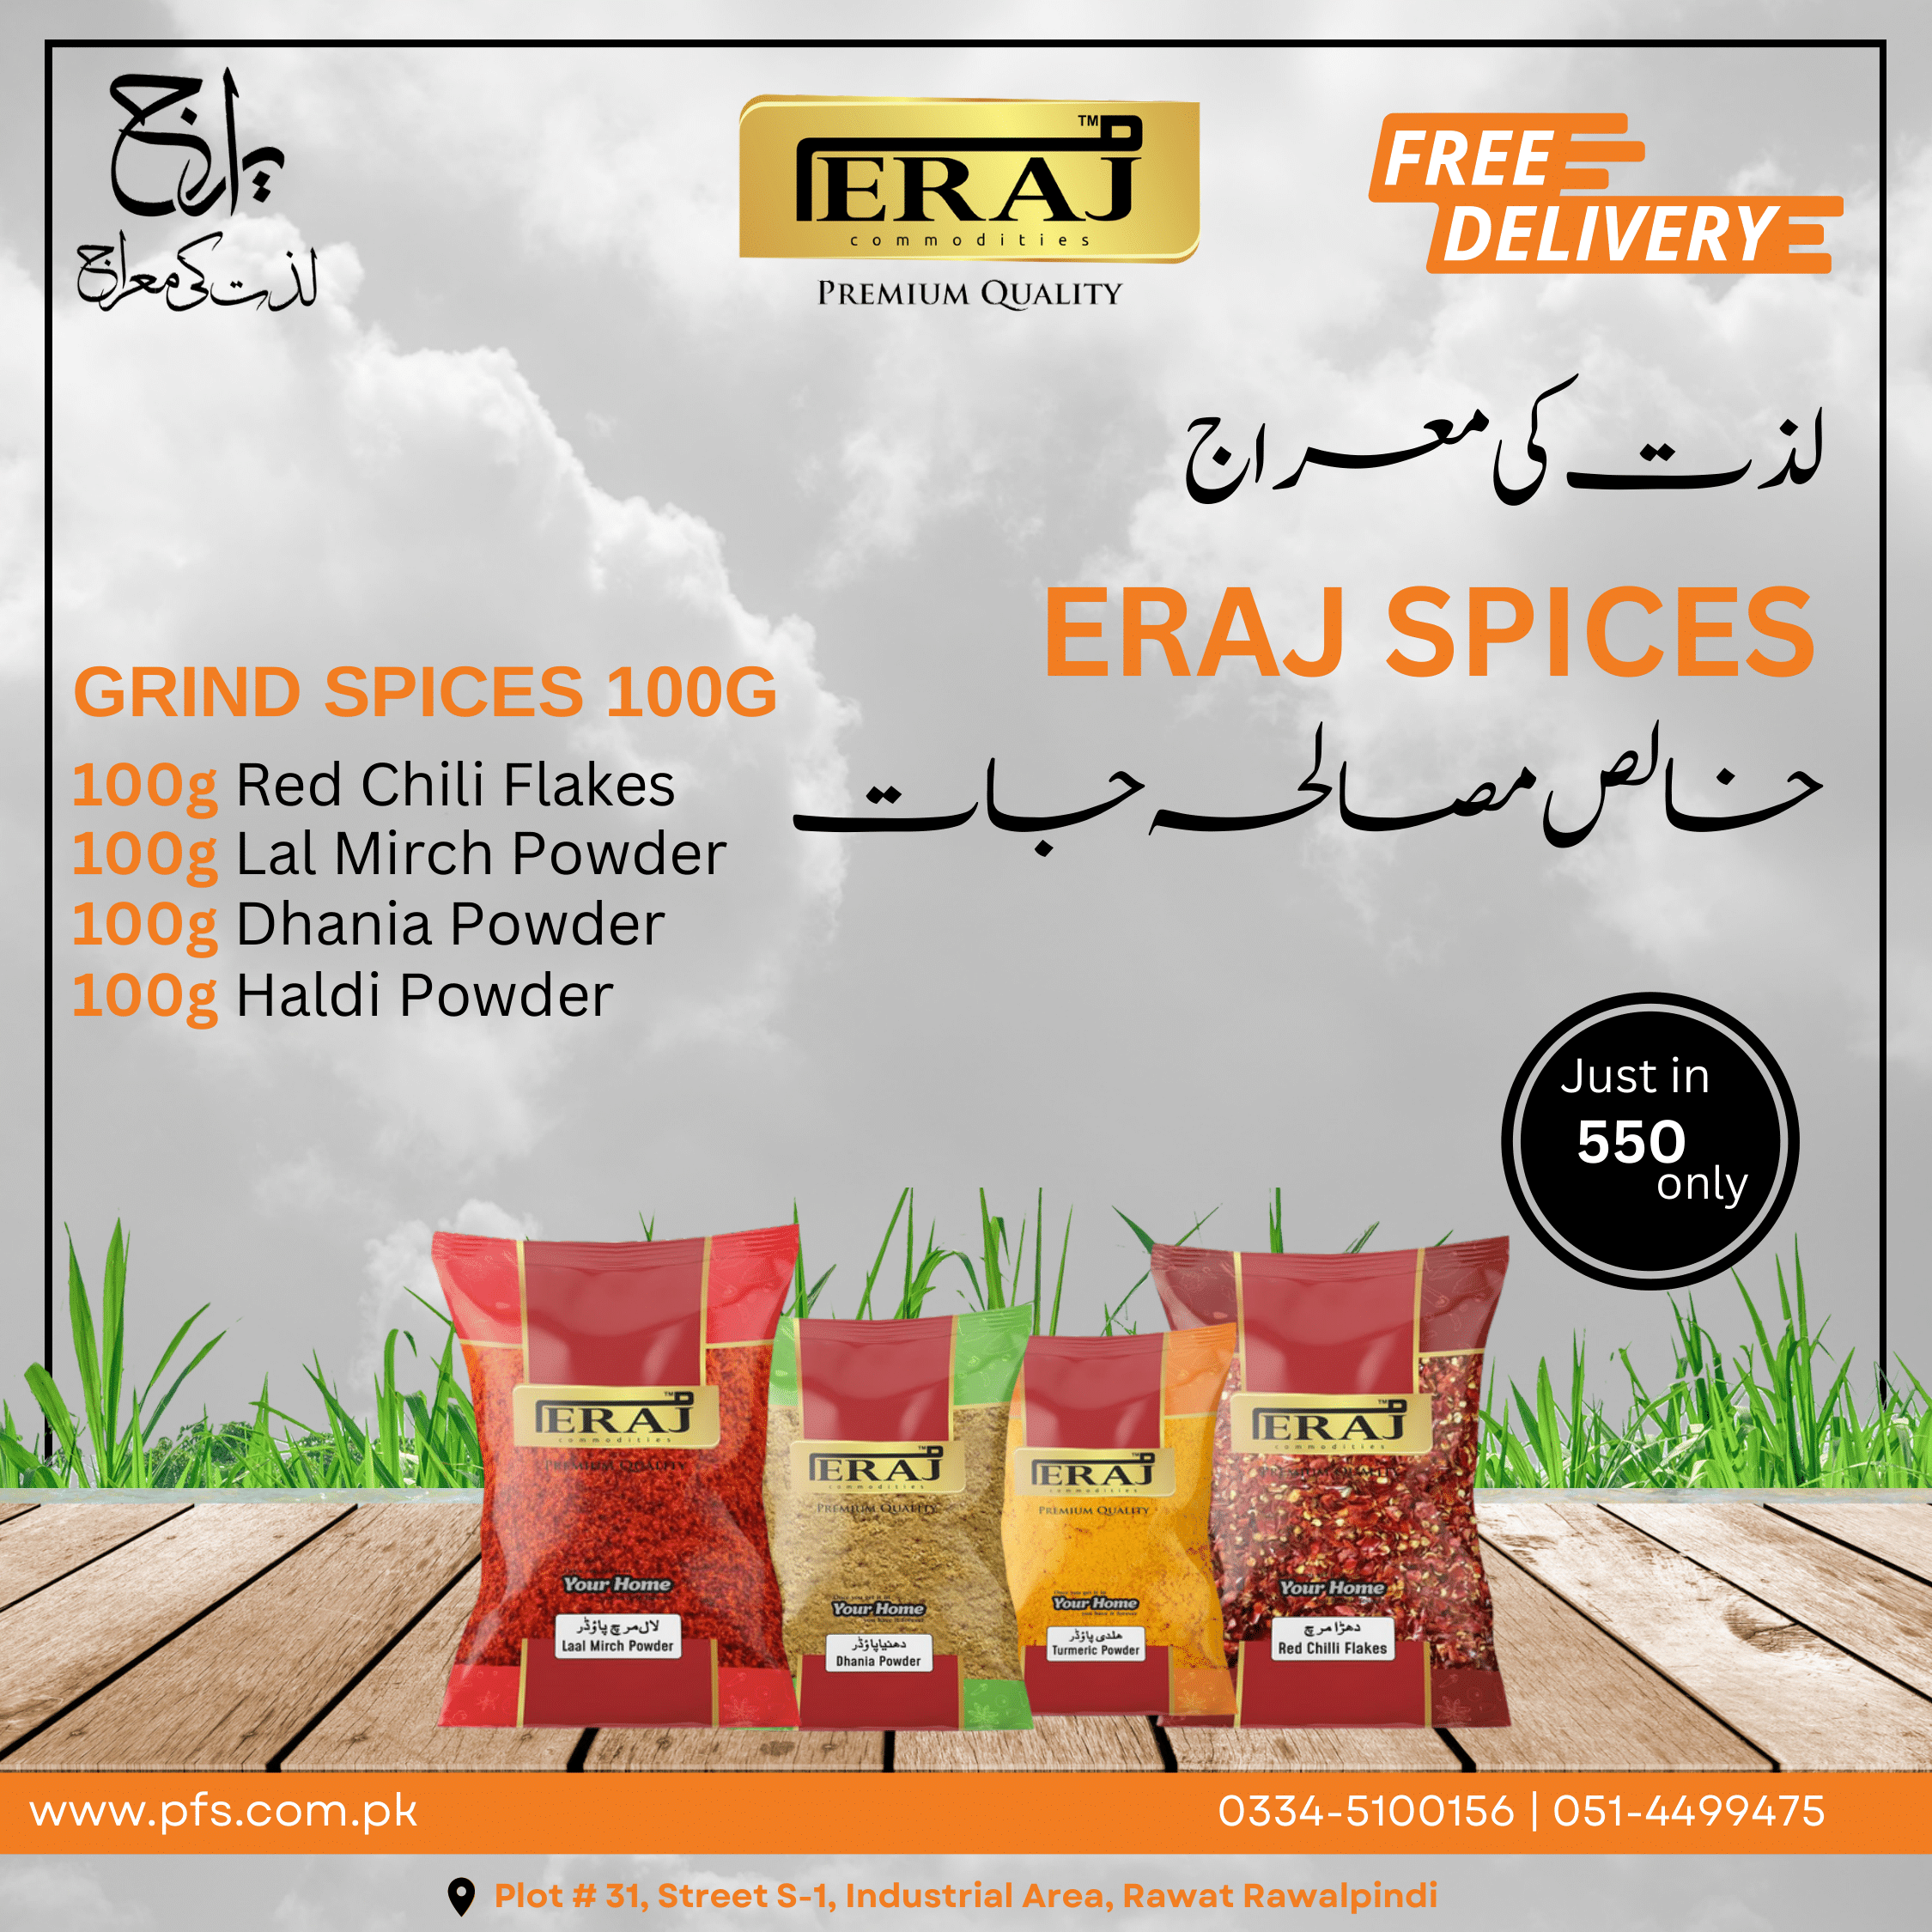 Grind Spices 100g